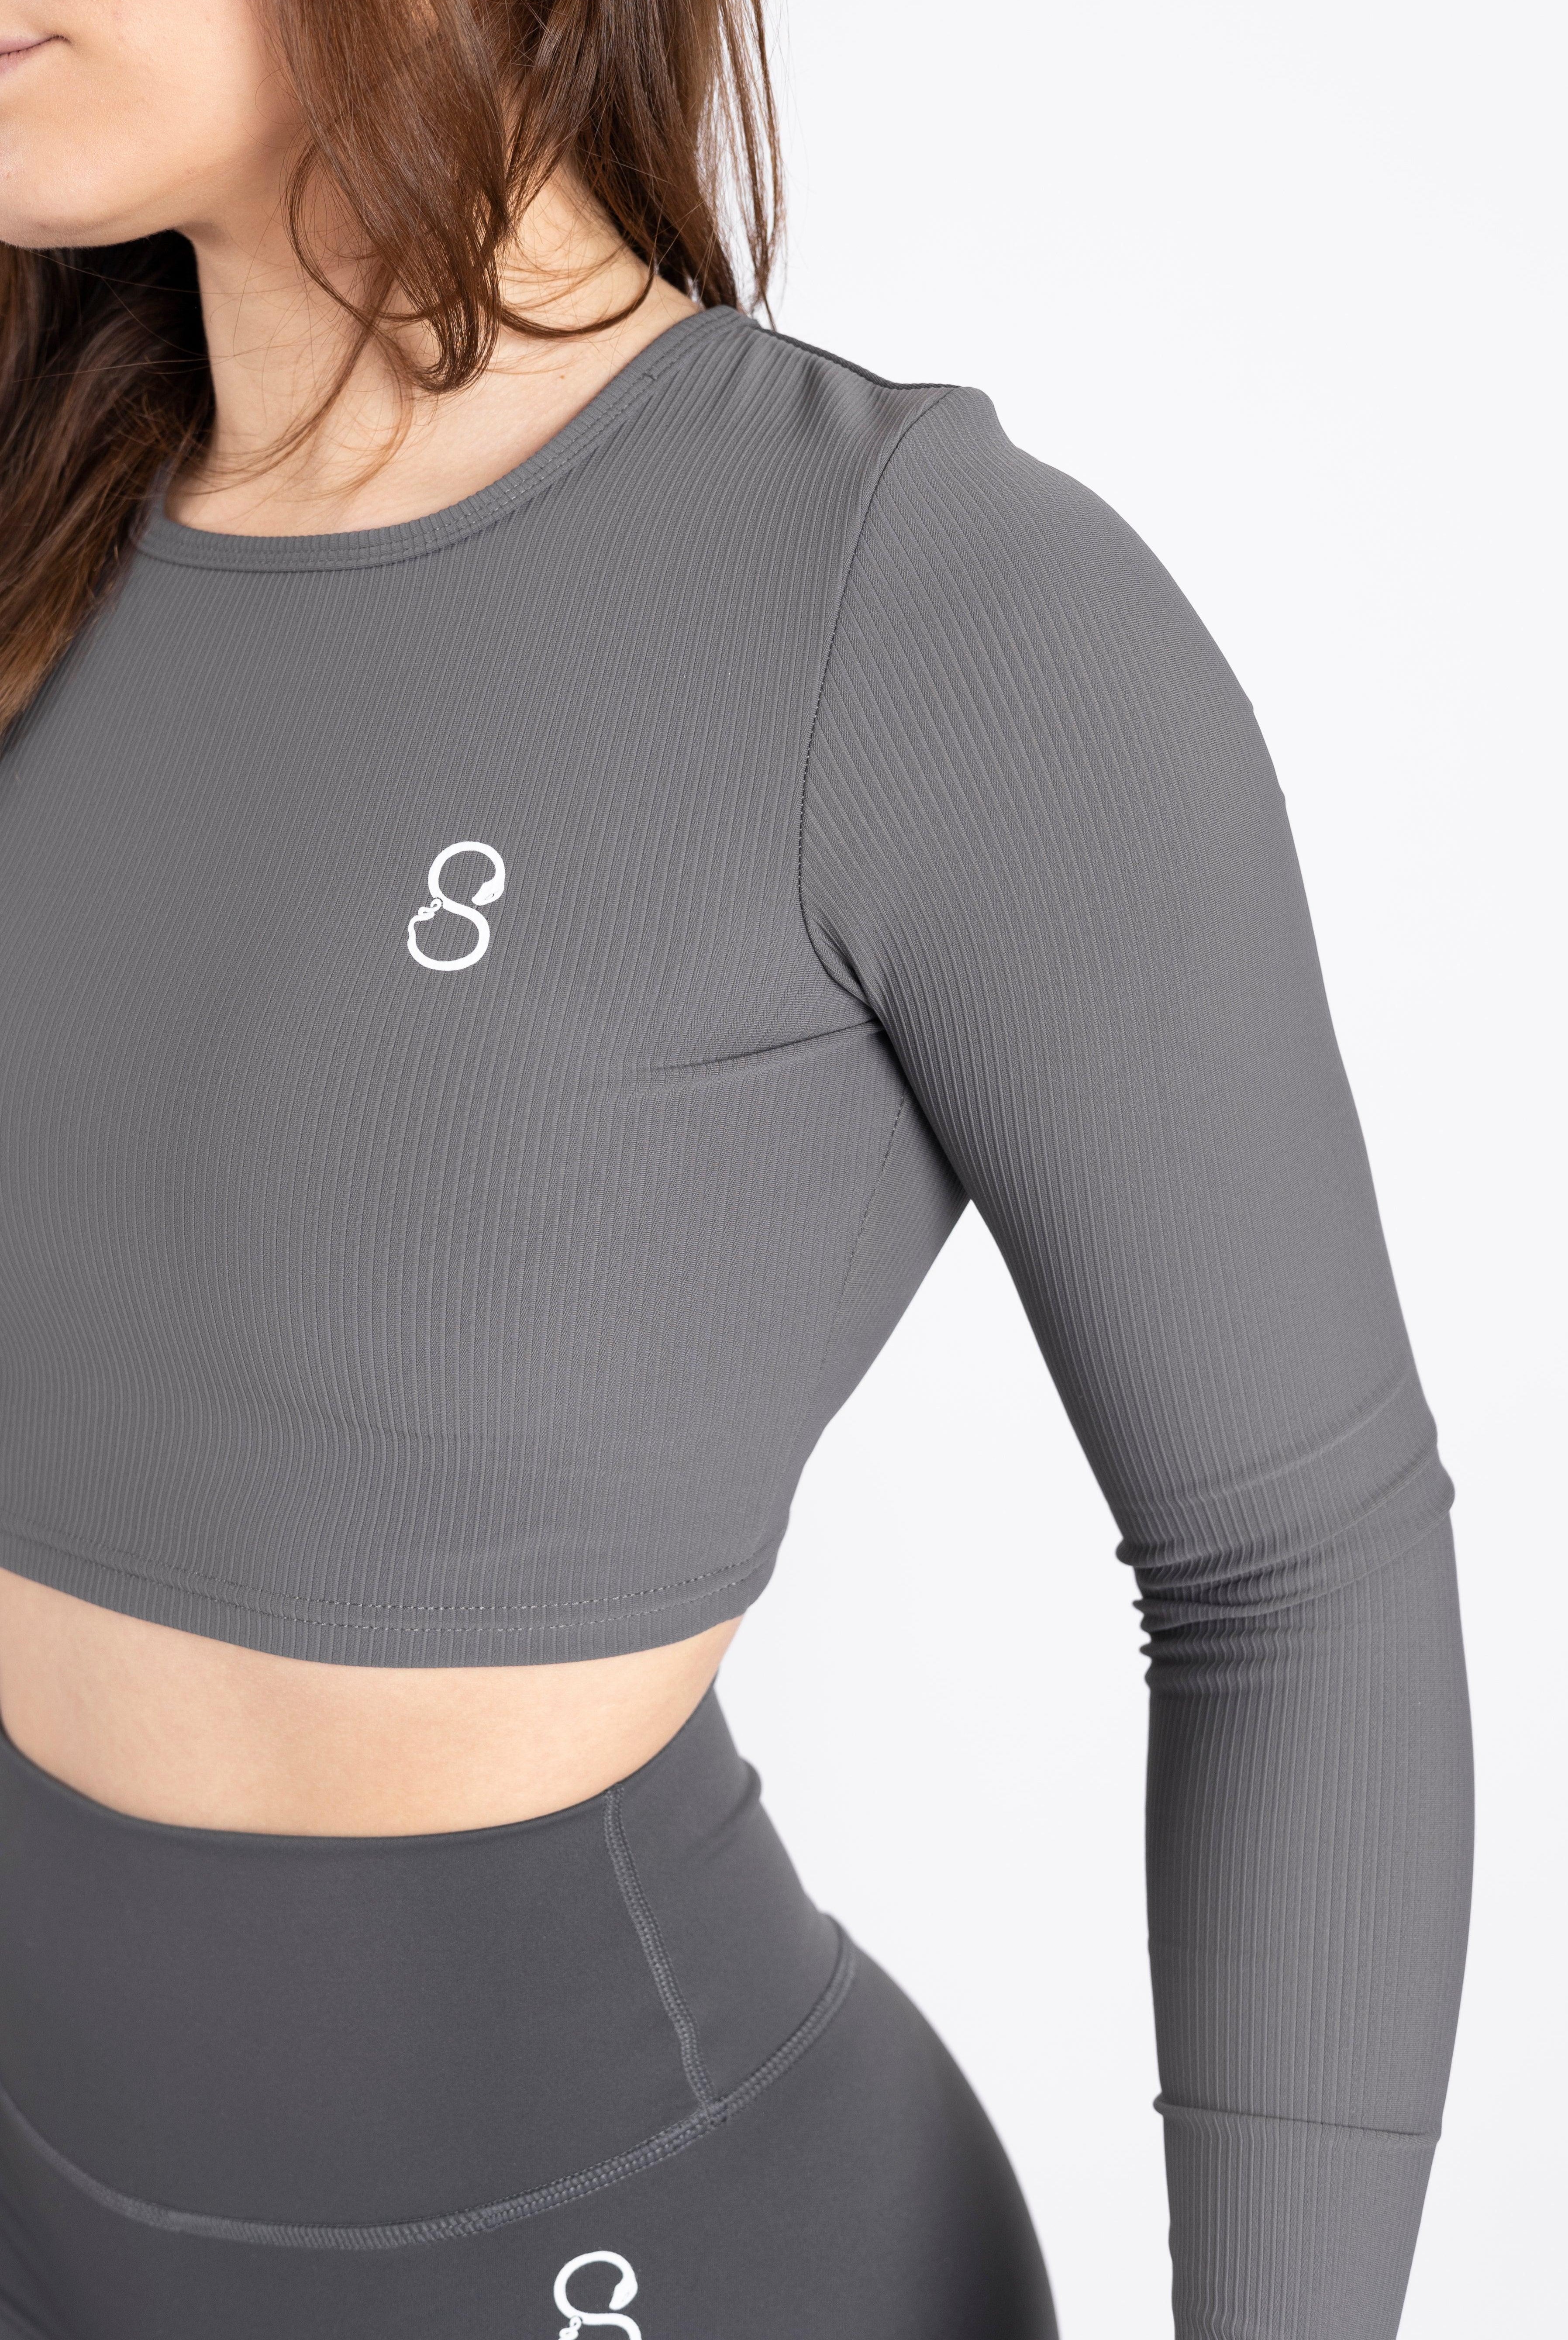 Scale Crop Top Long Sleeve Gris - Styxgym